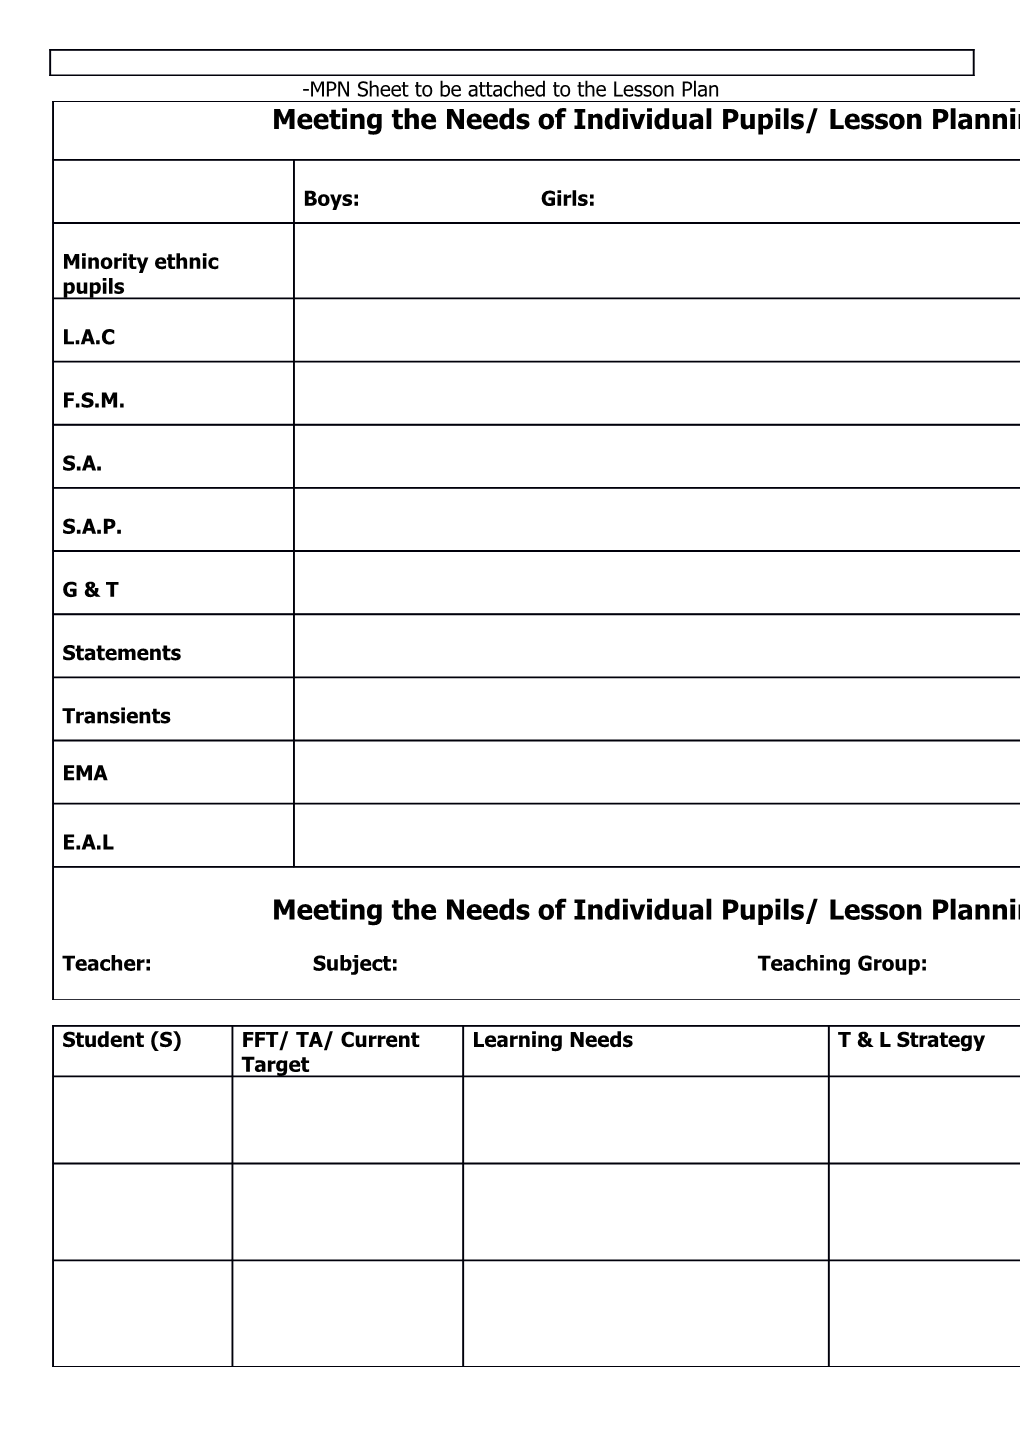 MPN Sheet to Be Attached to the Lesson Plan